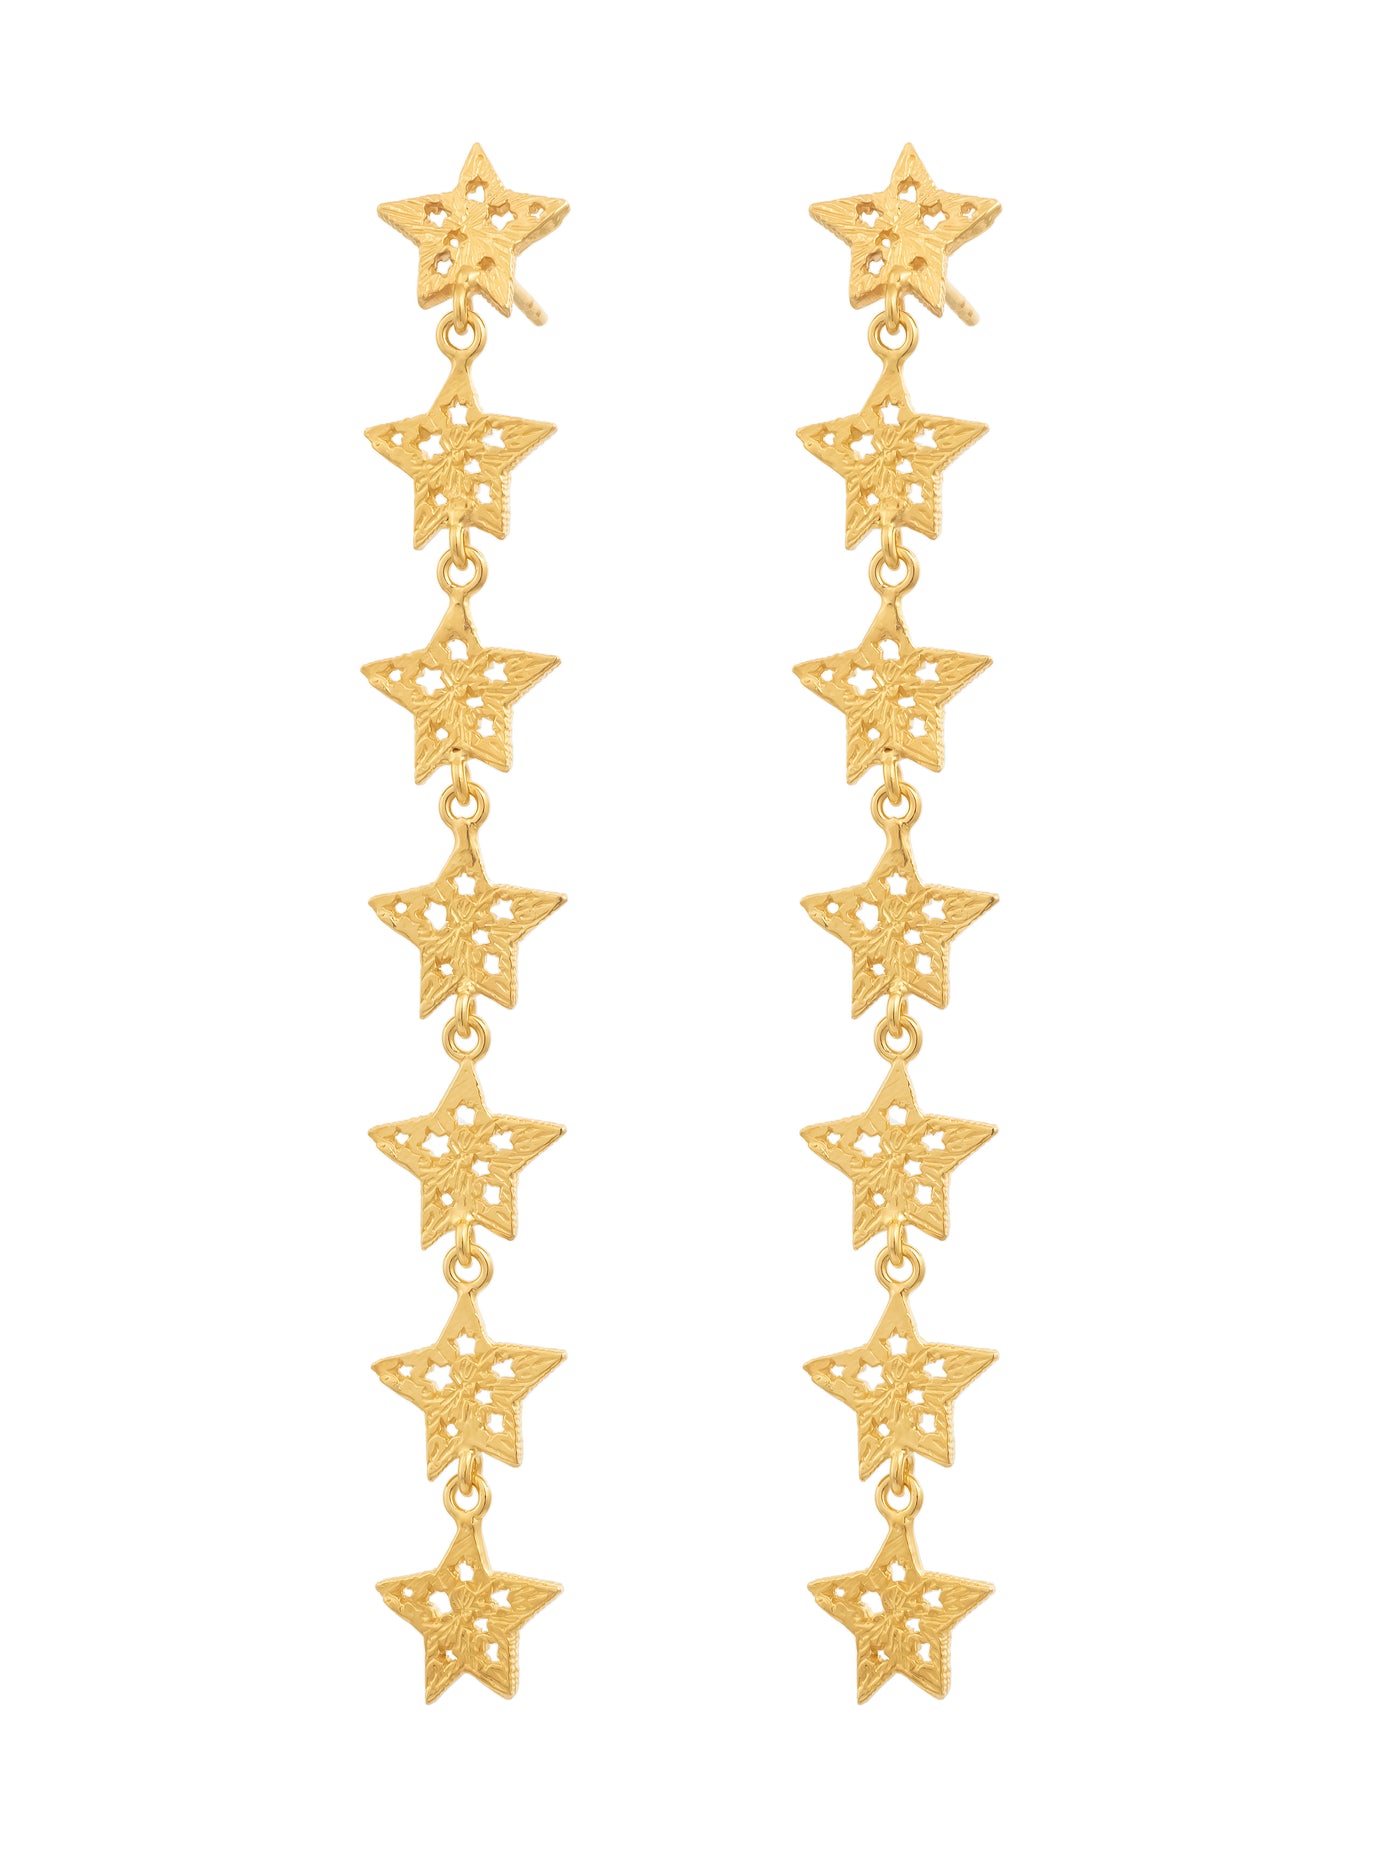 7 stars earrings. Silver, gold-plated